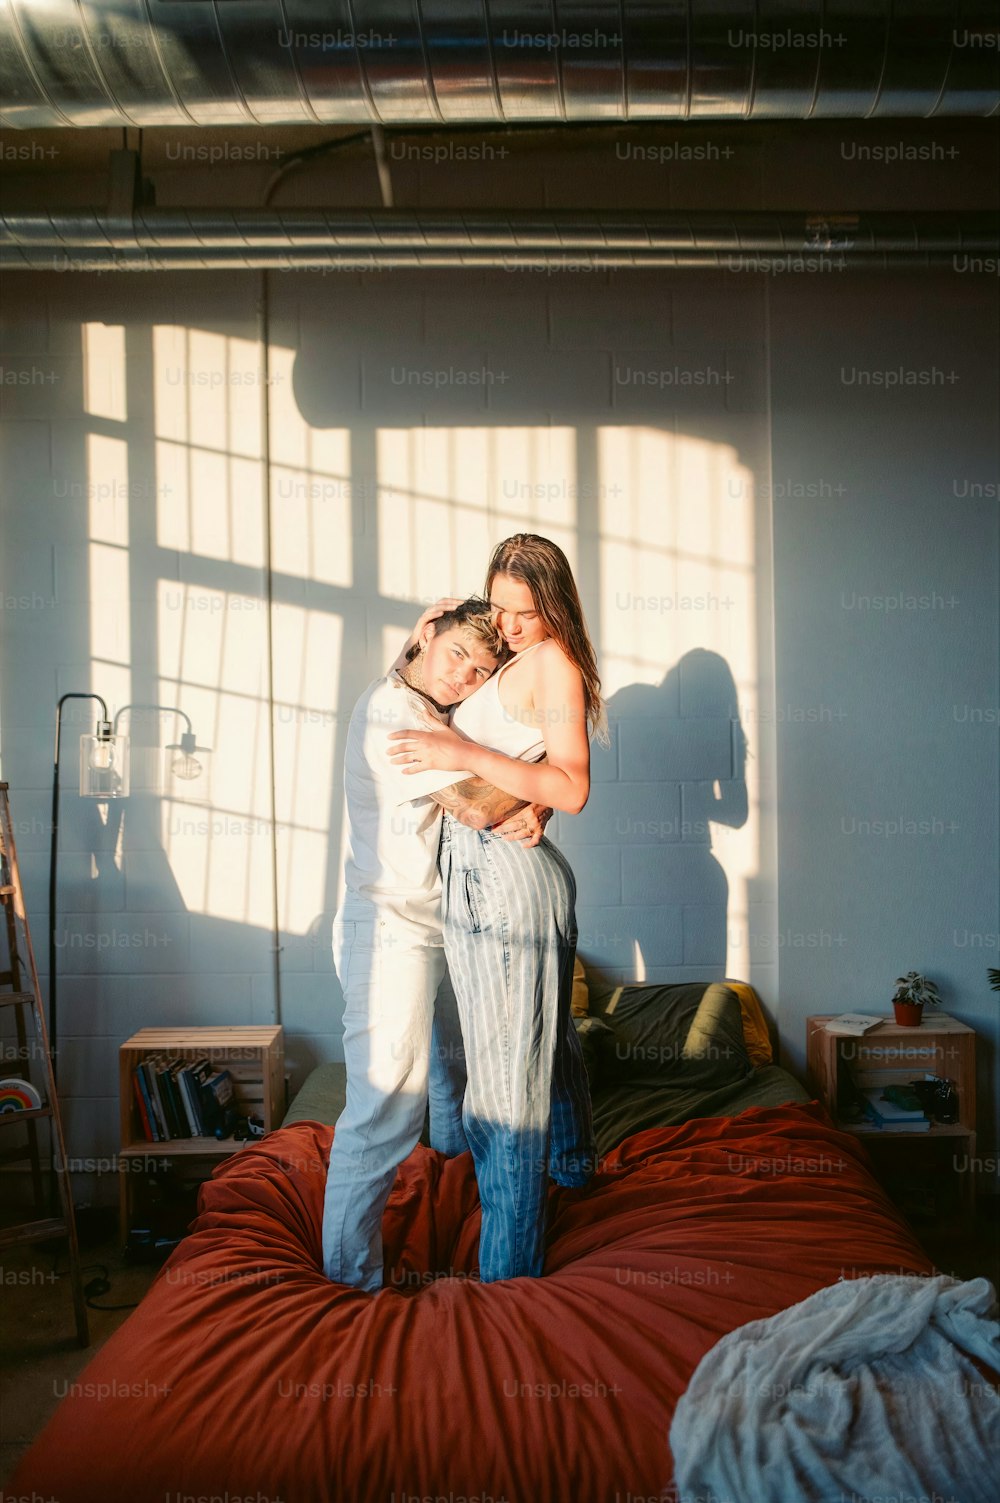 a man holding a woman in his arms while standing on a bed